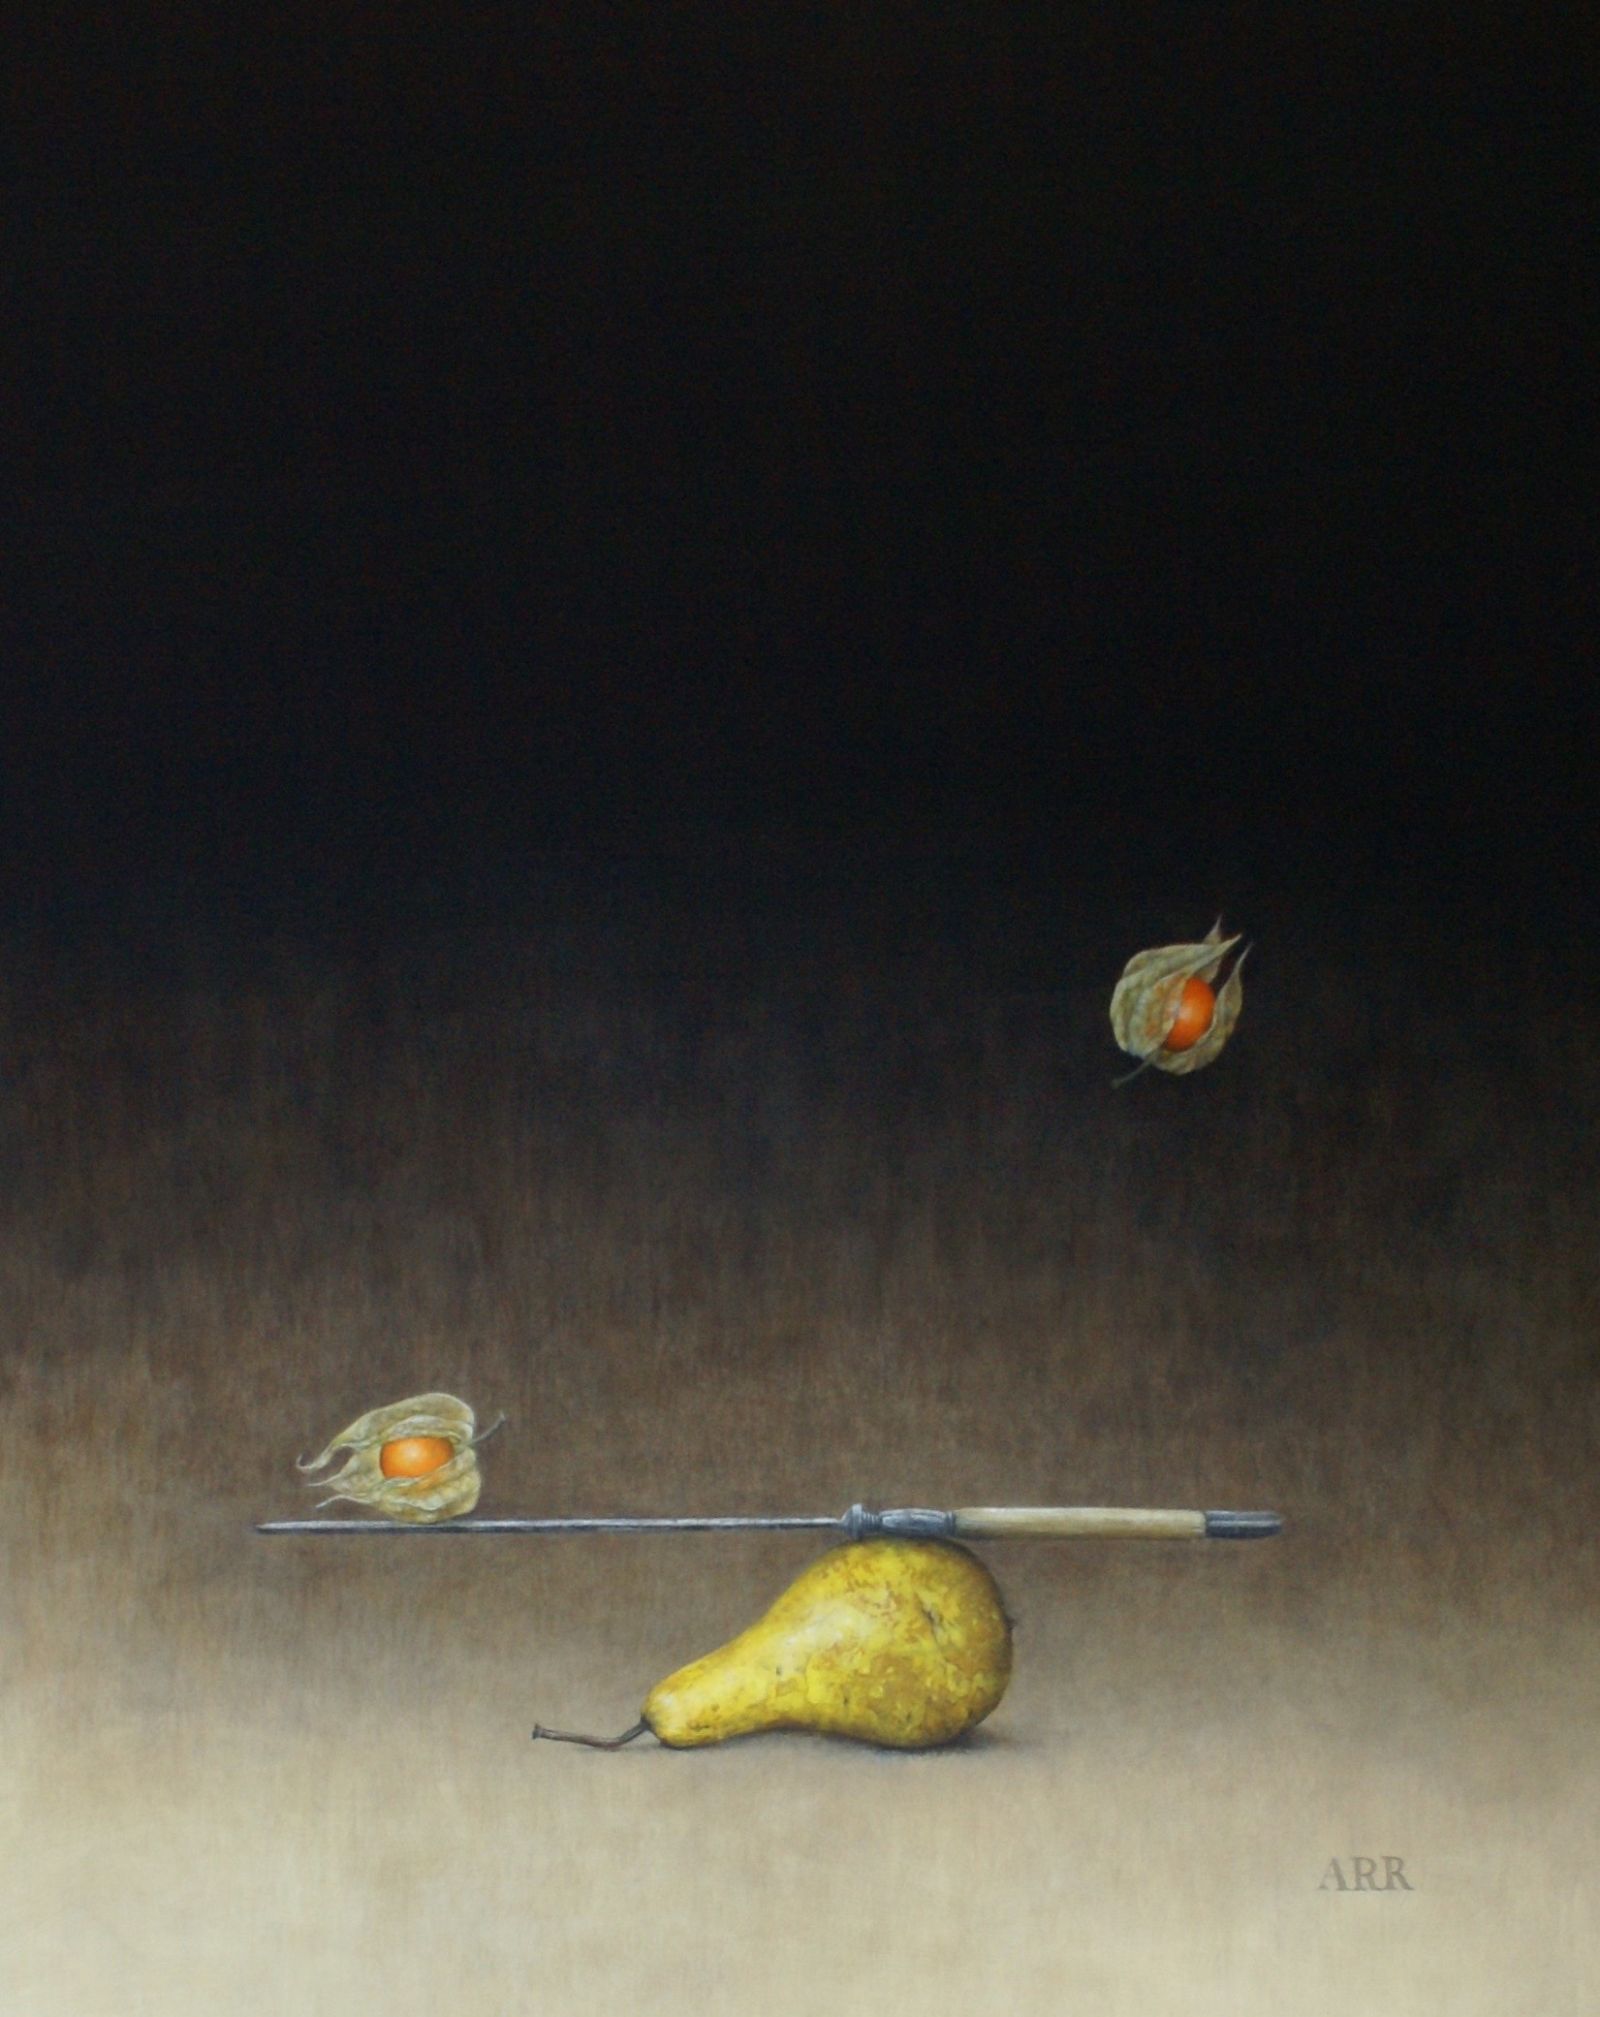 Pear with Balancing Knife and Physalis by Alison Rankin